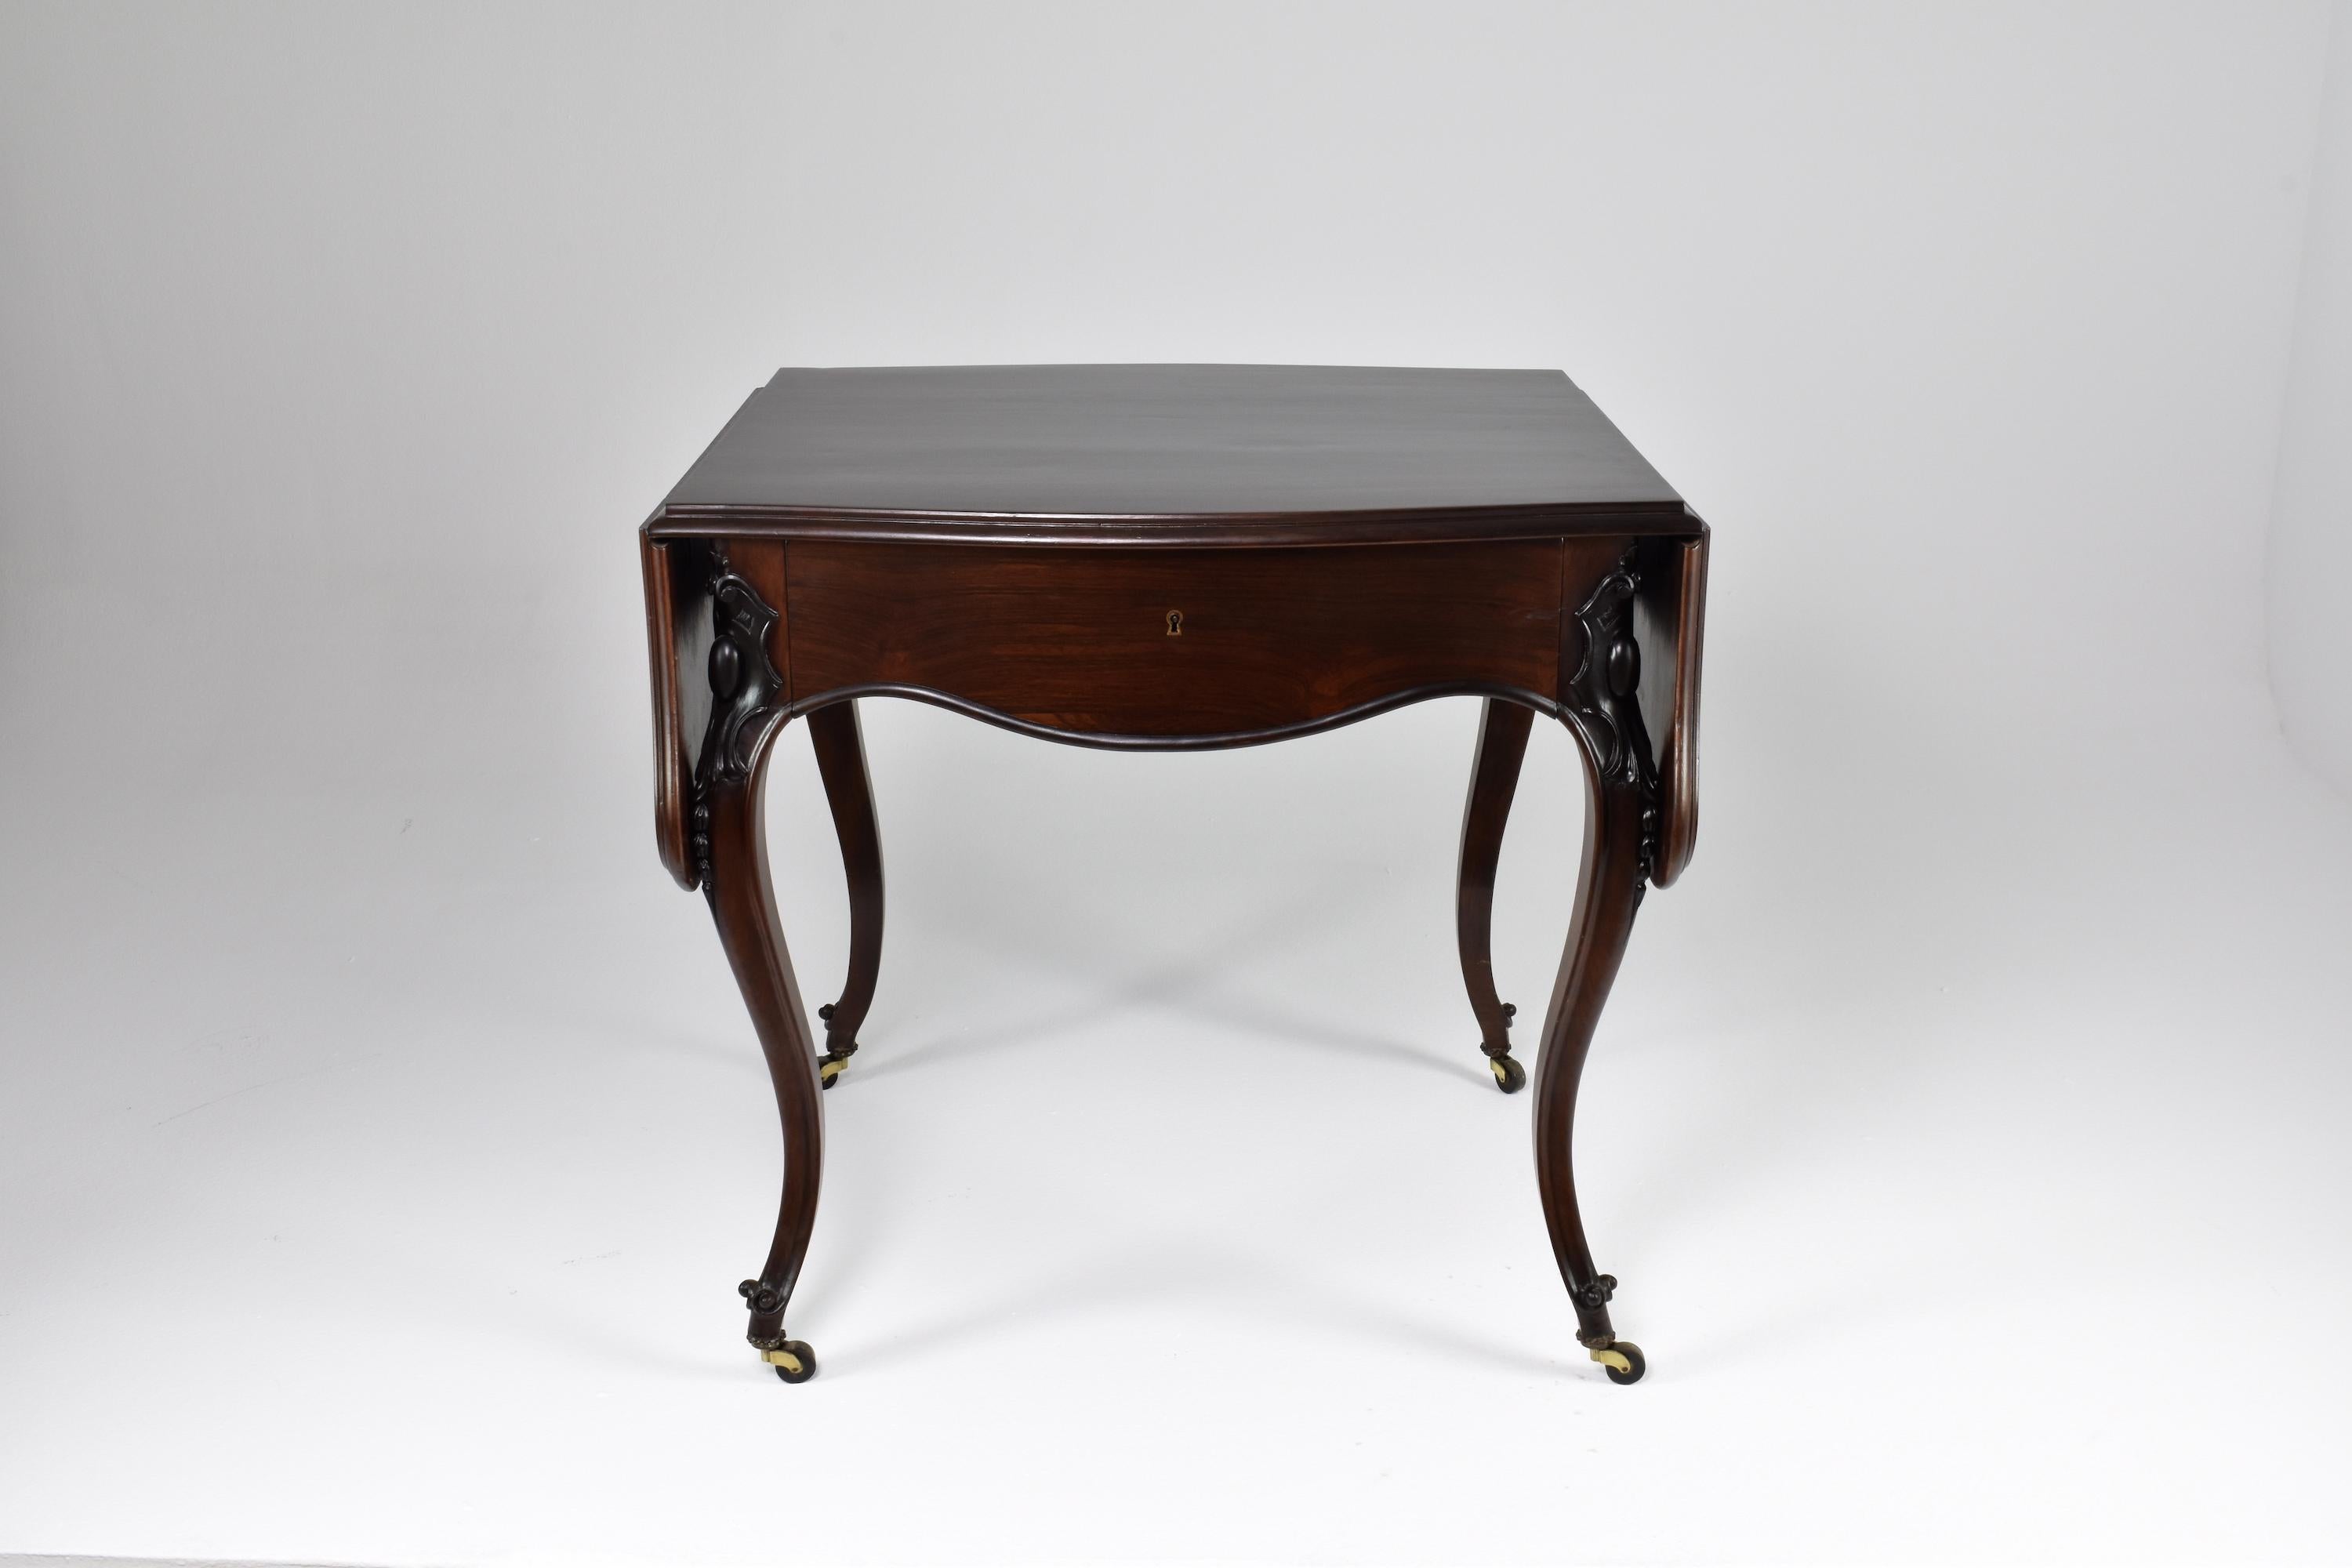 An antique St Louis XV centre table handcrafted with an adjustable foldable, tabletop ; a large central drawer; and brass rollers. 
This piece combines practicality and elegance, the rectangular top can be folded down to create a smaller surface